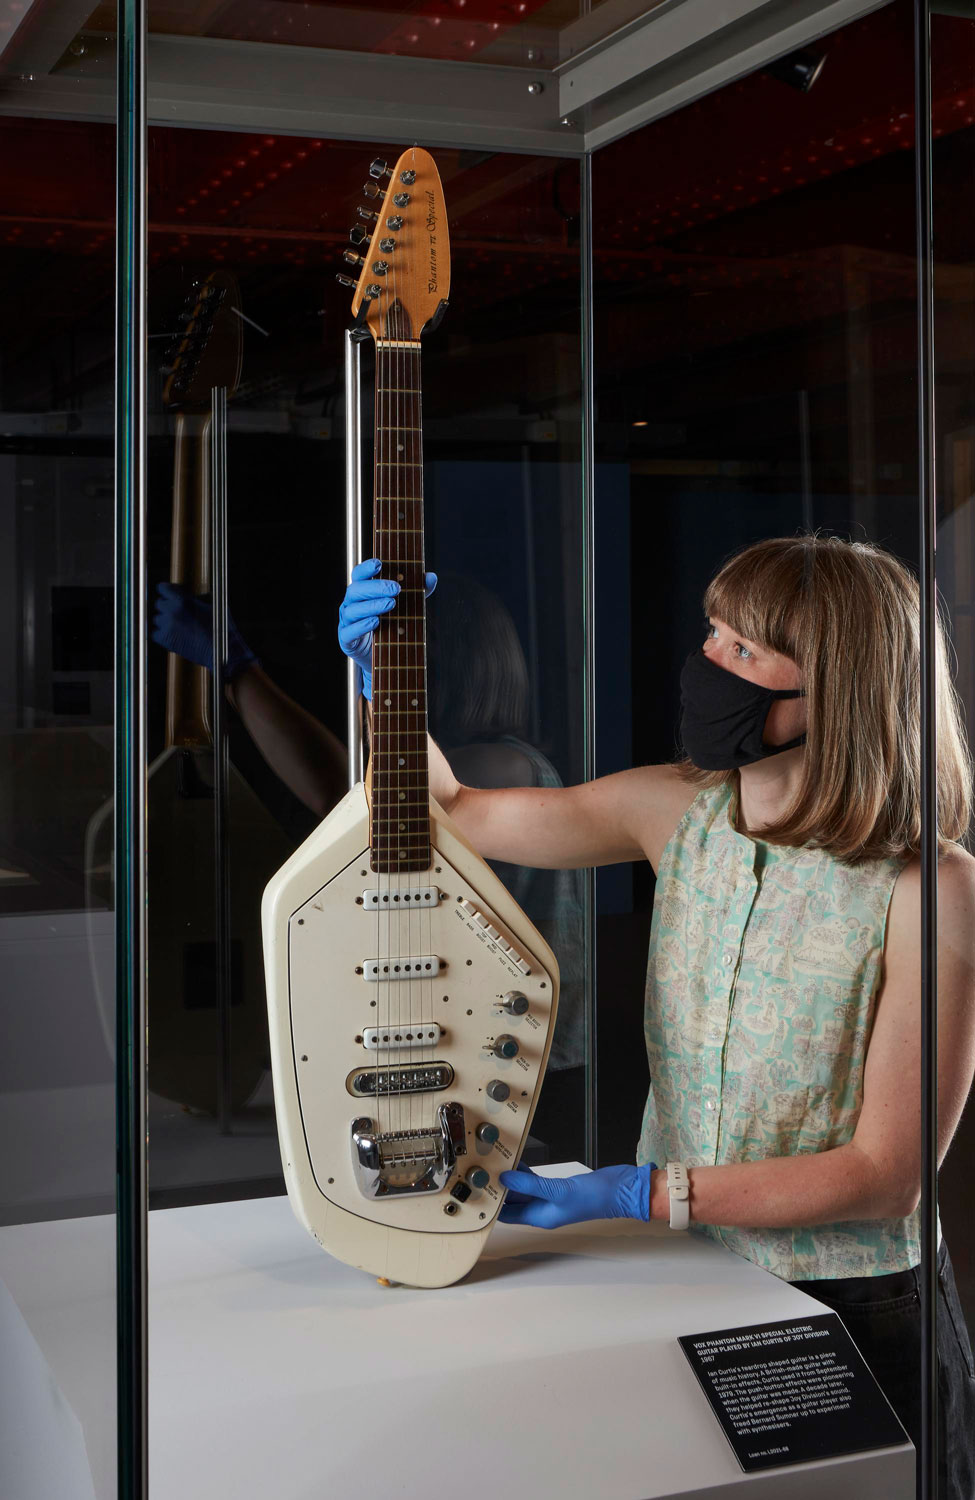 Conservator Kathryn Kreczak positioning Ian Curtis’s Vox Phantom guitar in its display case in Use Hearing Protection